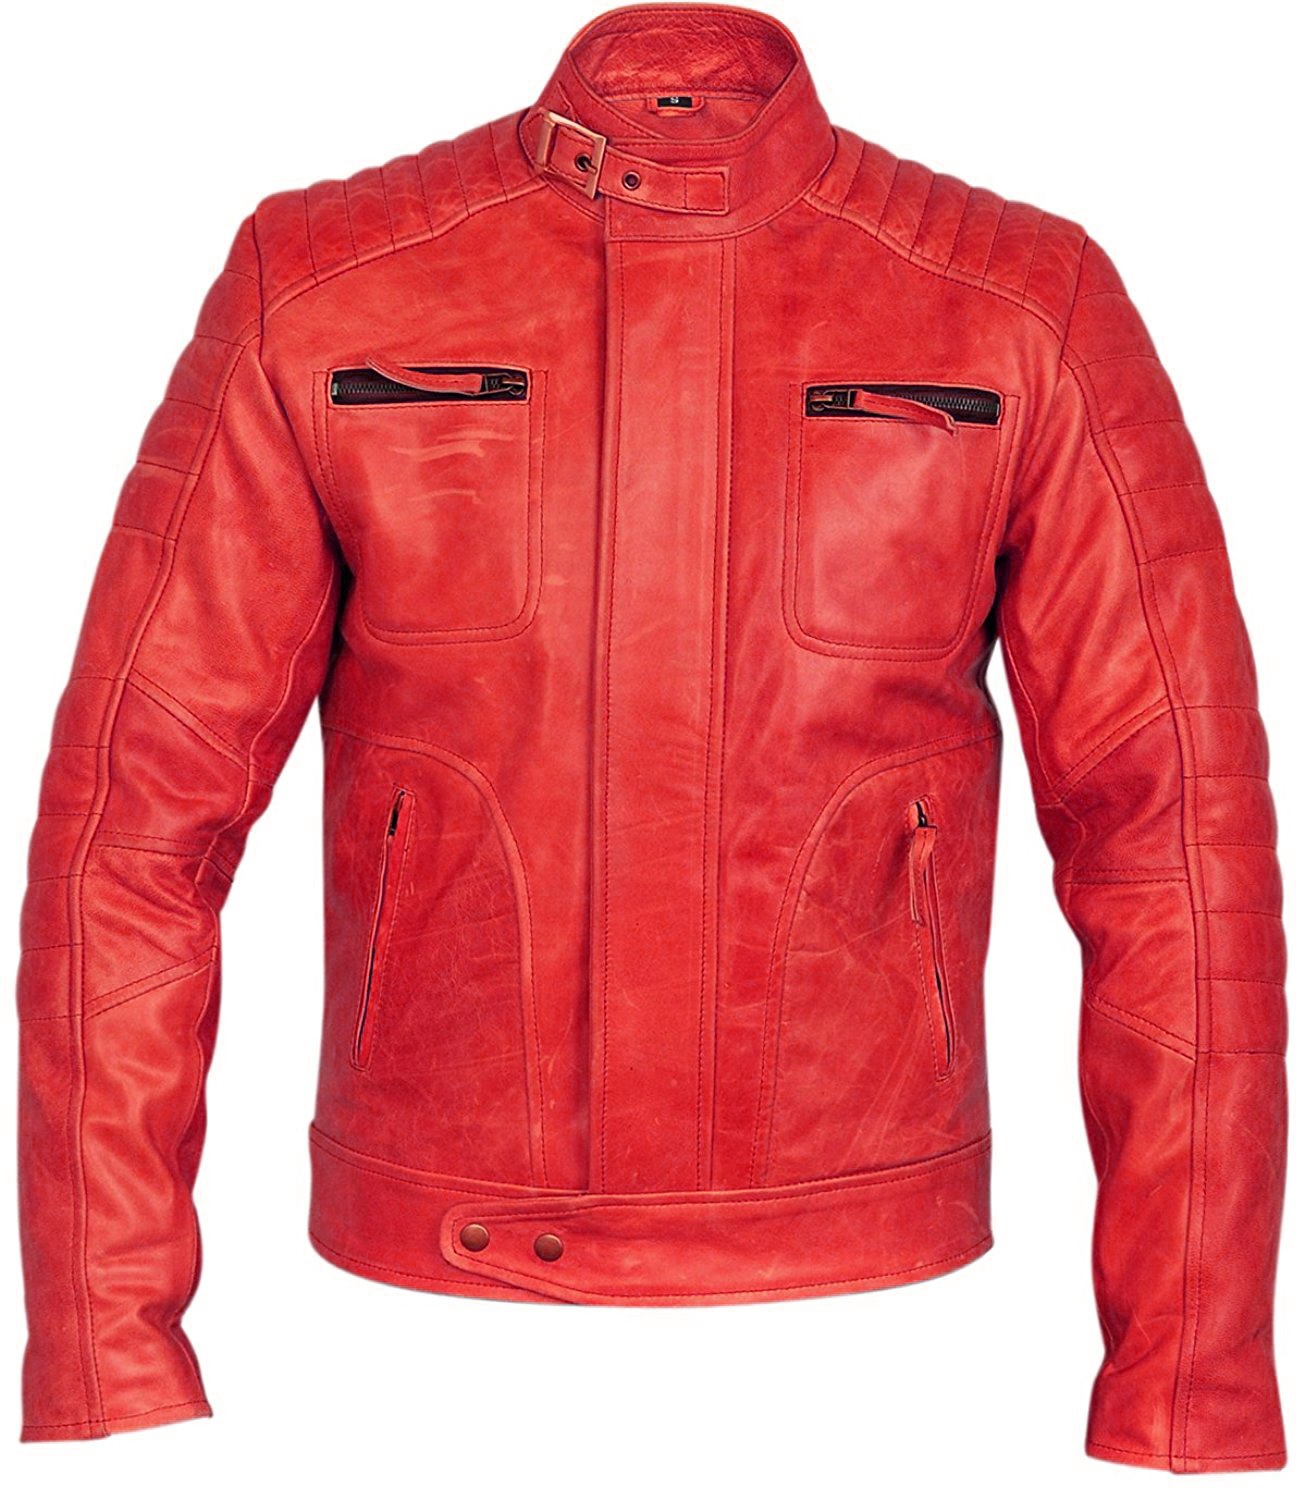 Leather Jacket Collection | Genuine Leather, Bikers Style, Men Jacket ...